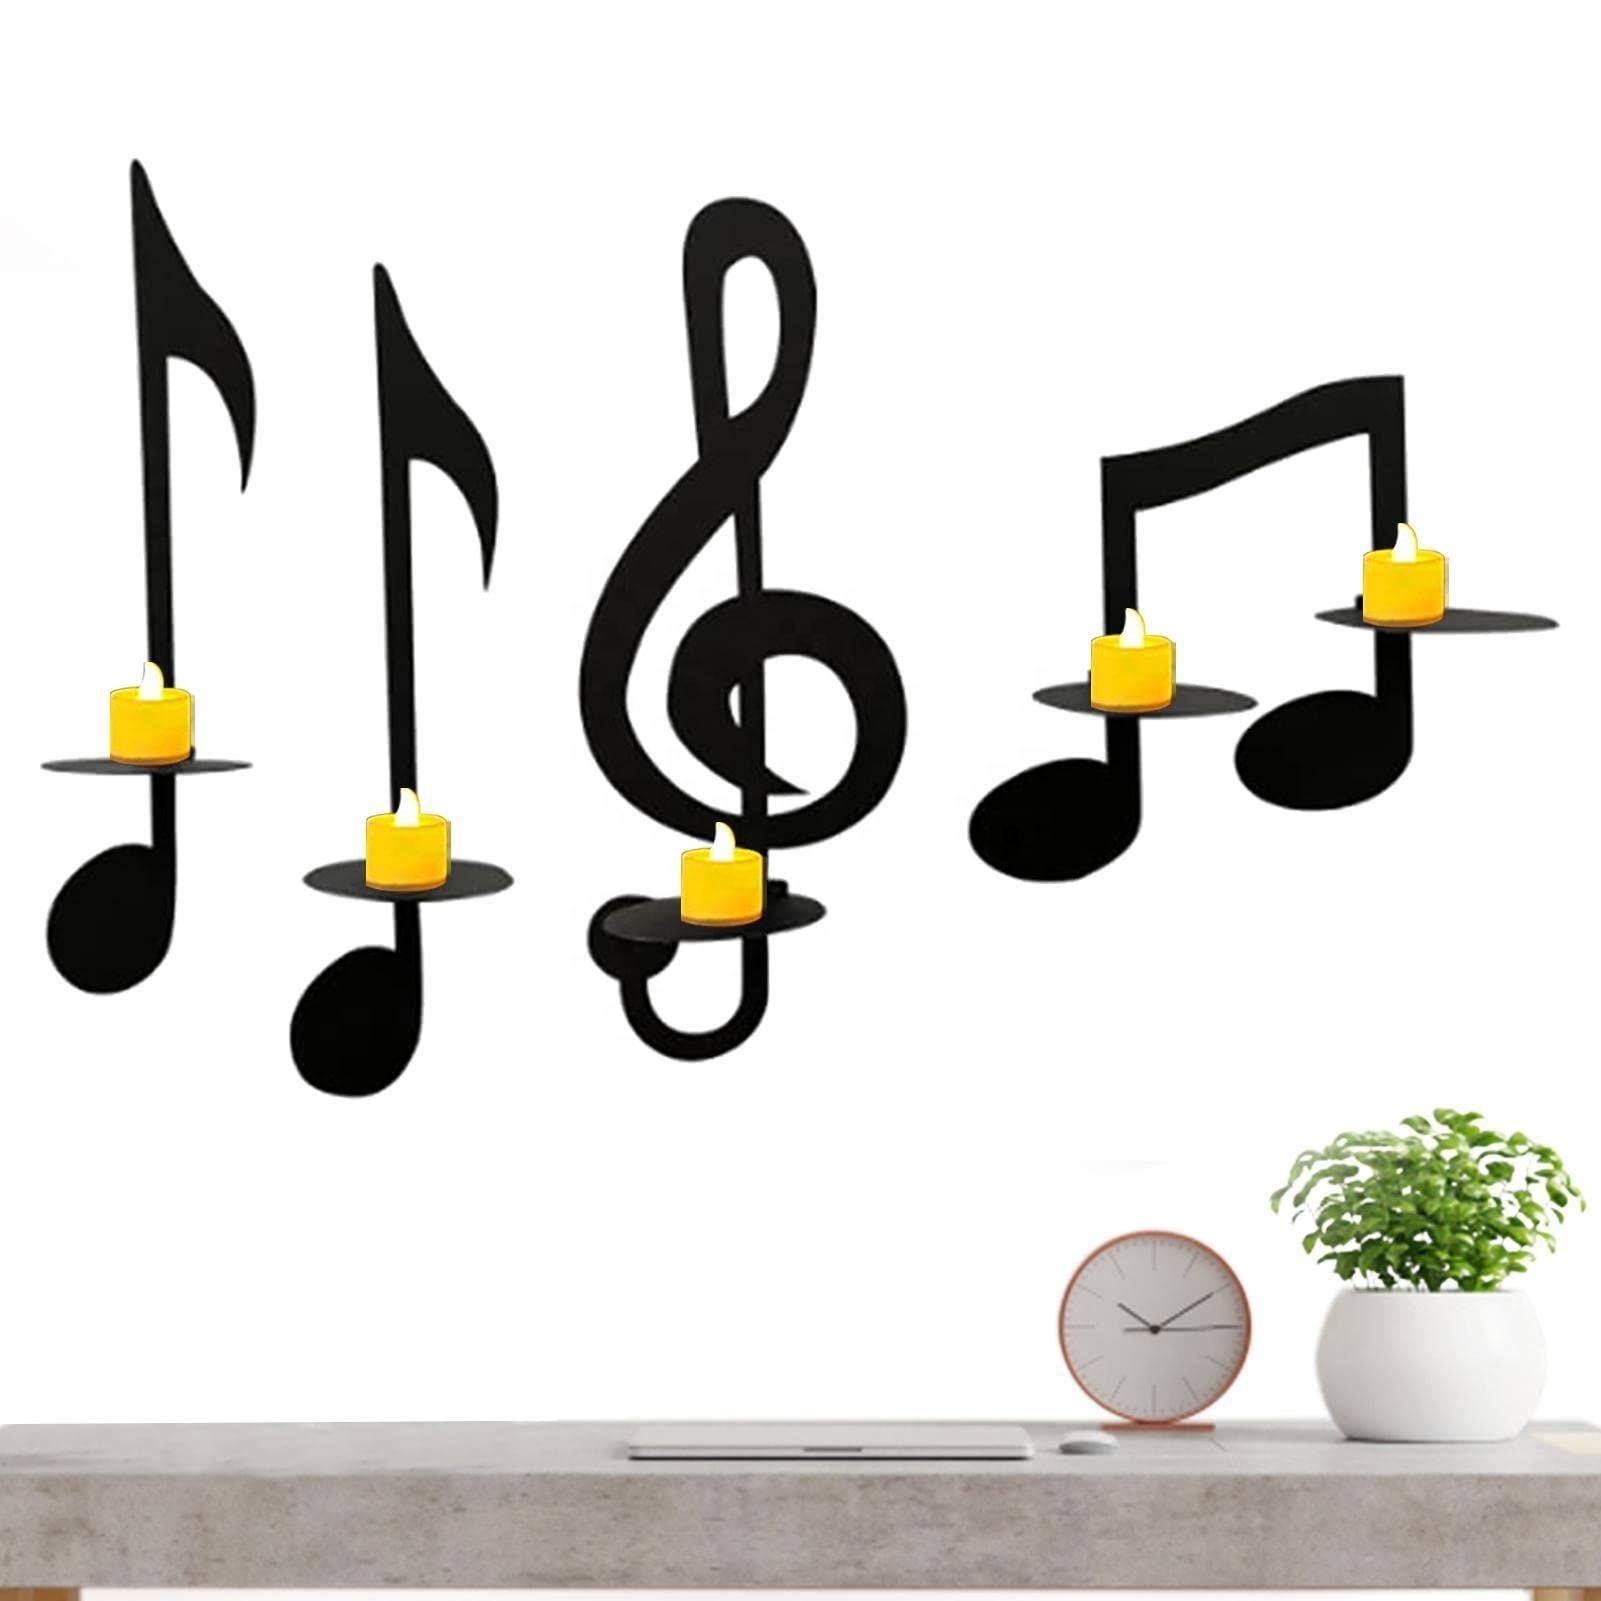 4 Pcs Black Music Note Wall Sconce Metal Candle Holder For Home Office Classroom Musical Symbol Gift Decor